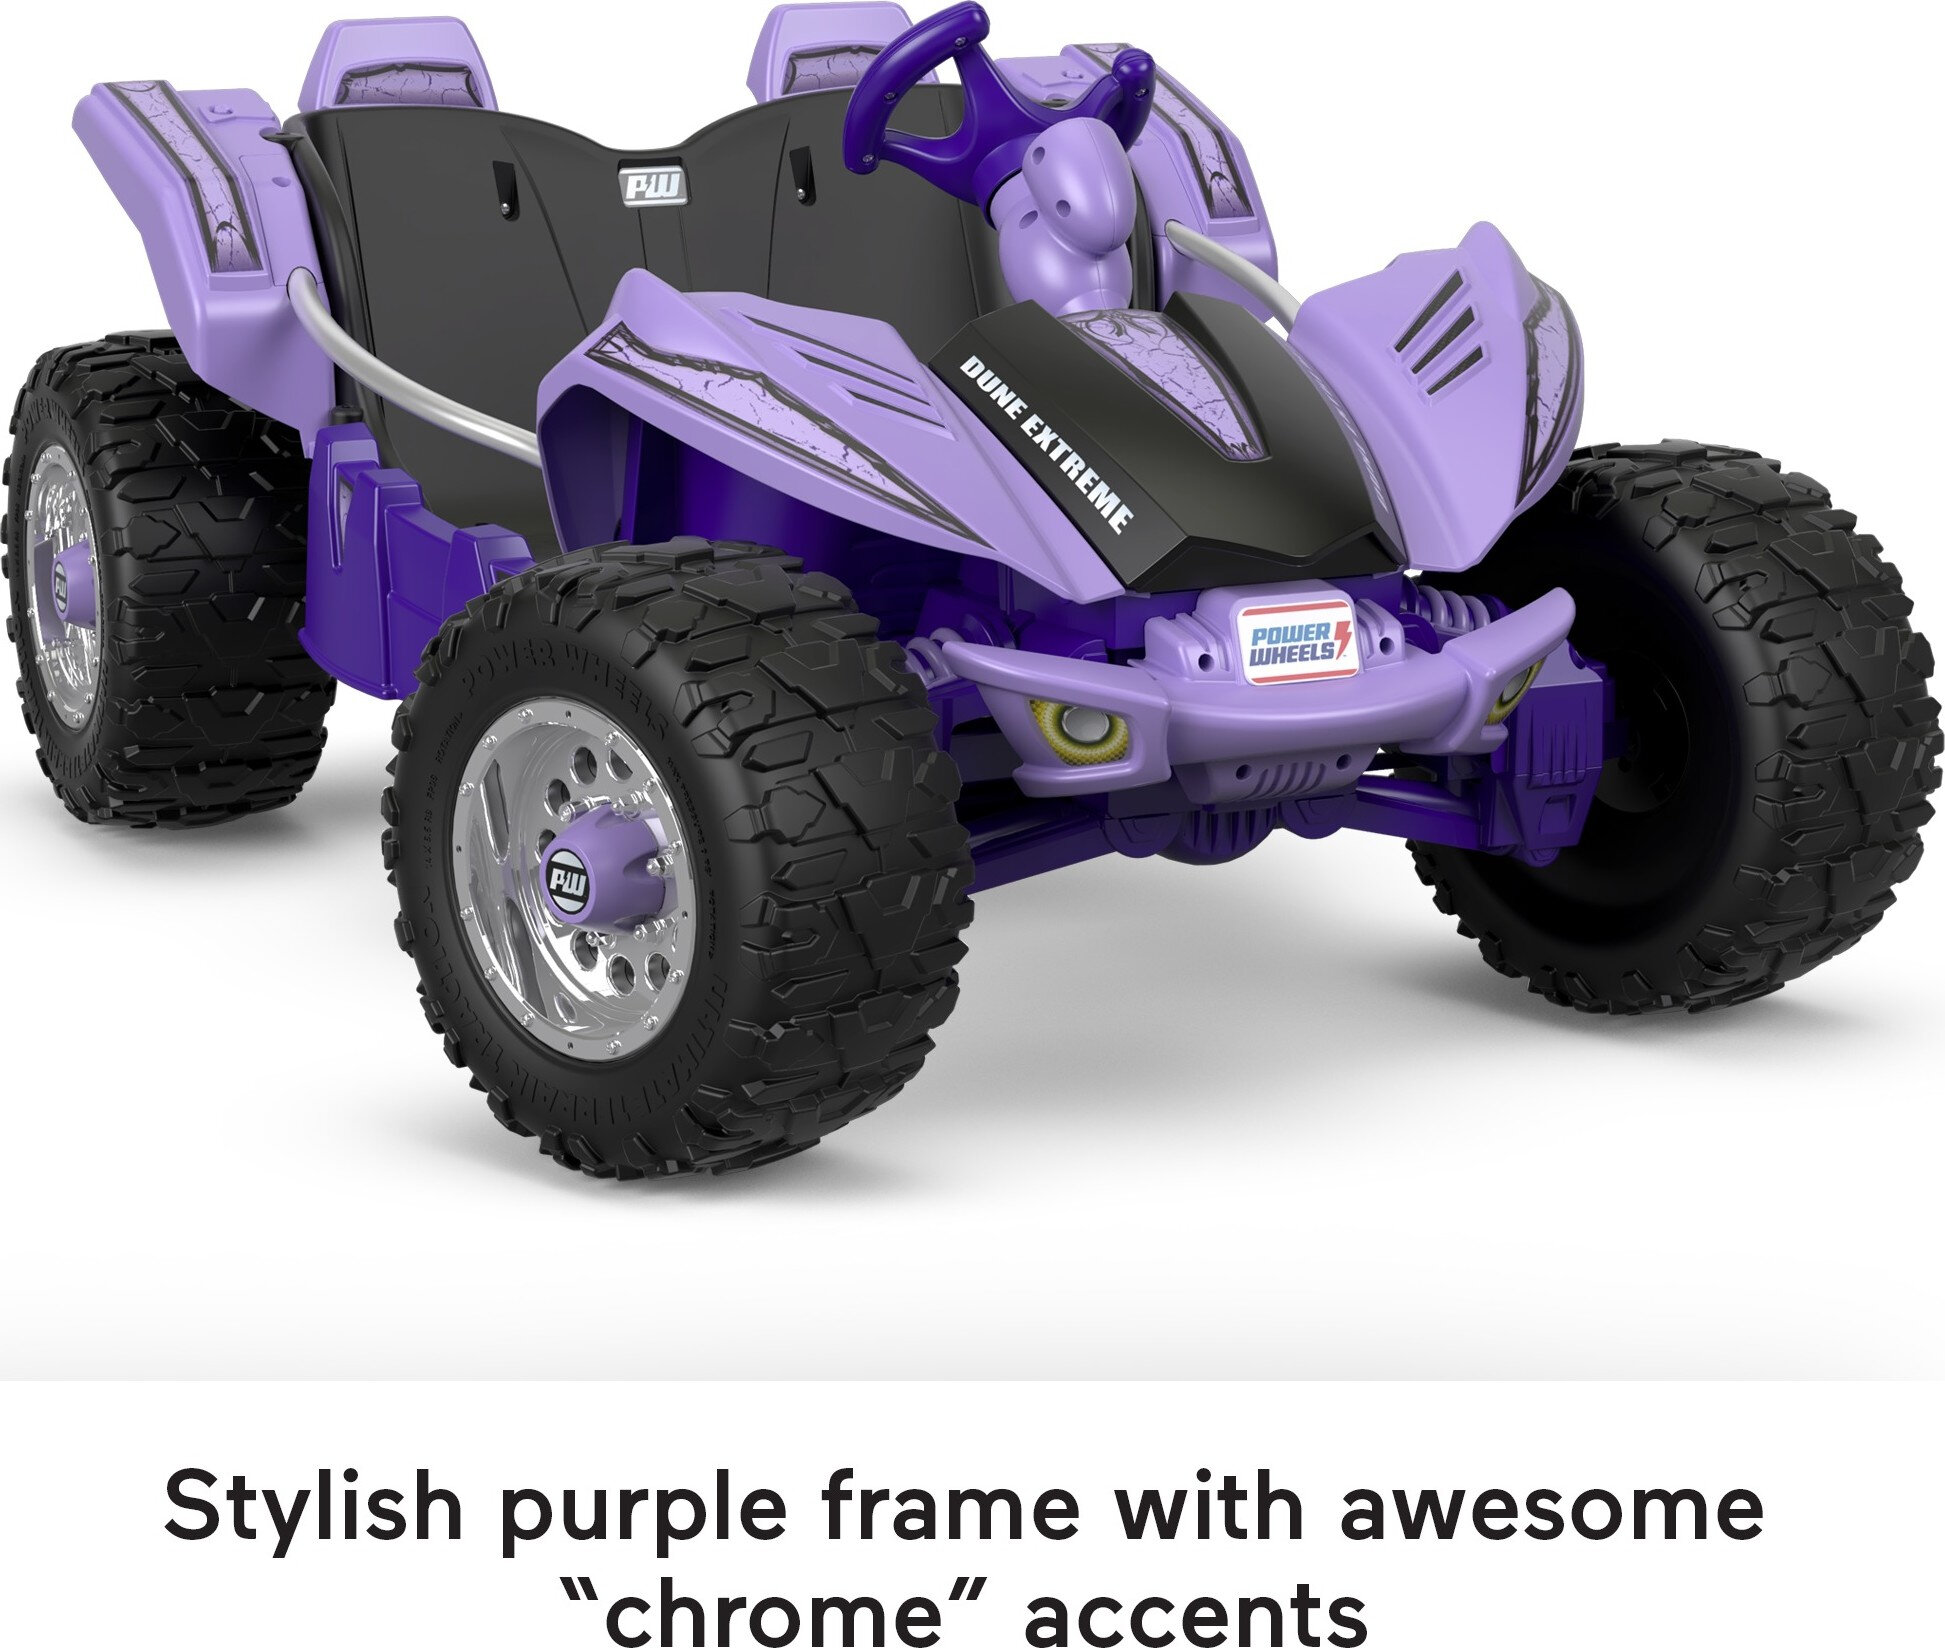 12V Power Wheels Dune Racer Extreme Battery-Powered Ride-on, Purple, for a Child Ages 3-7 - image 3 of 6